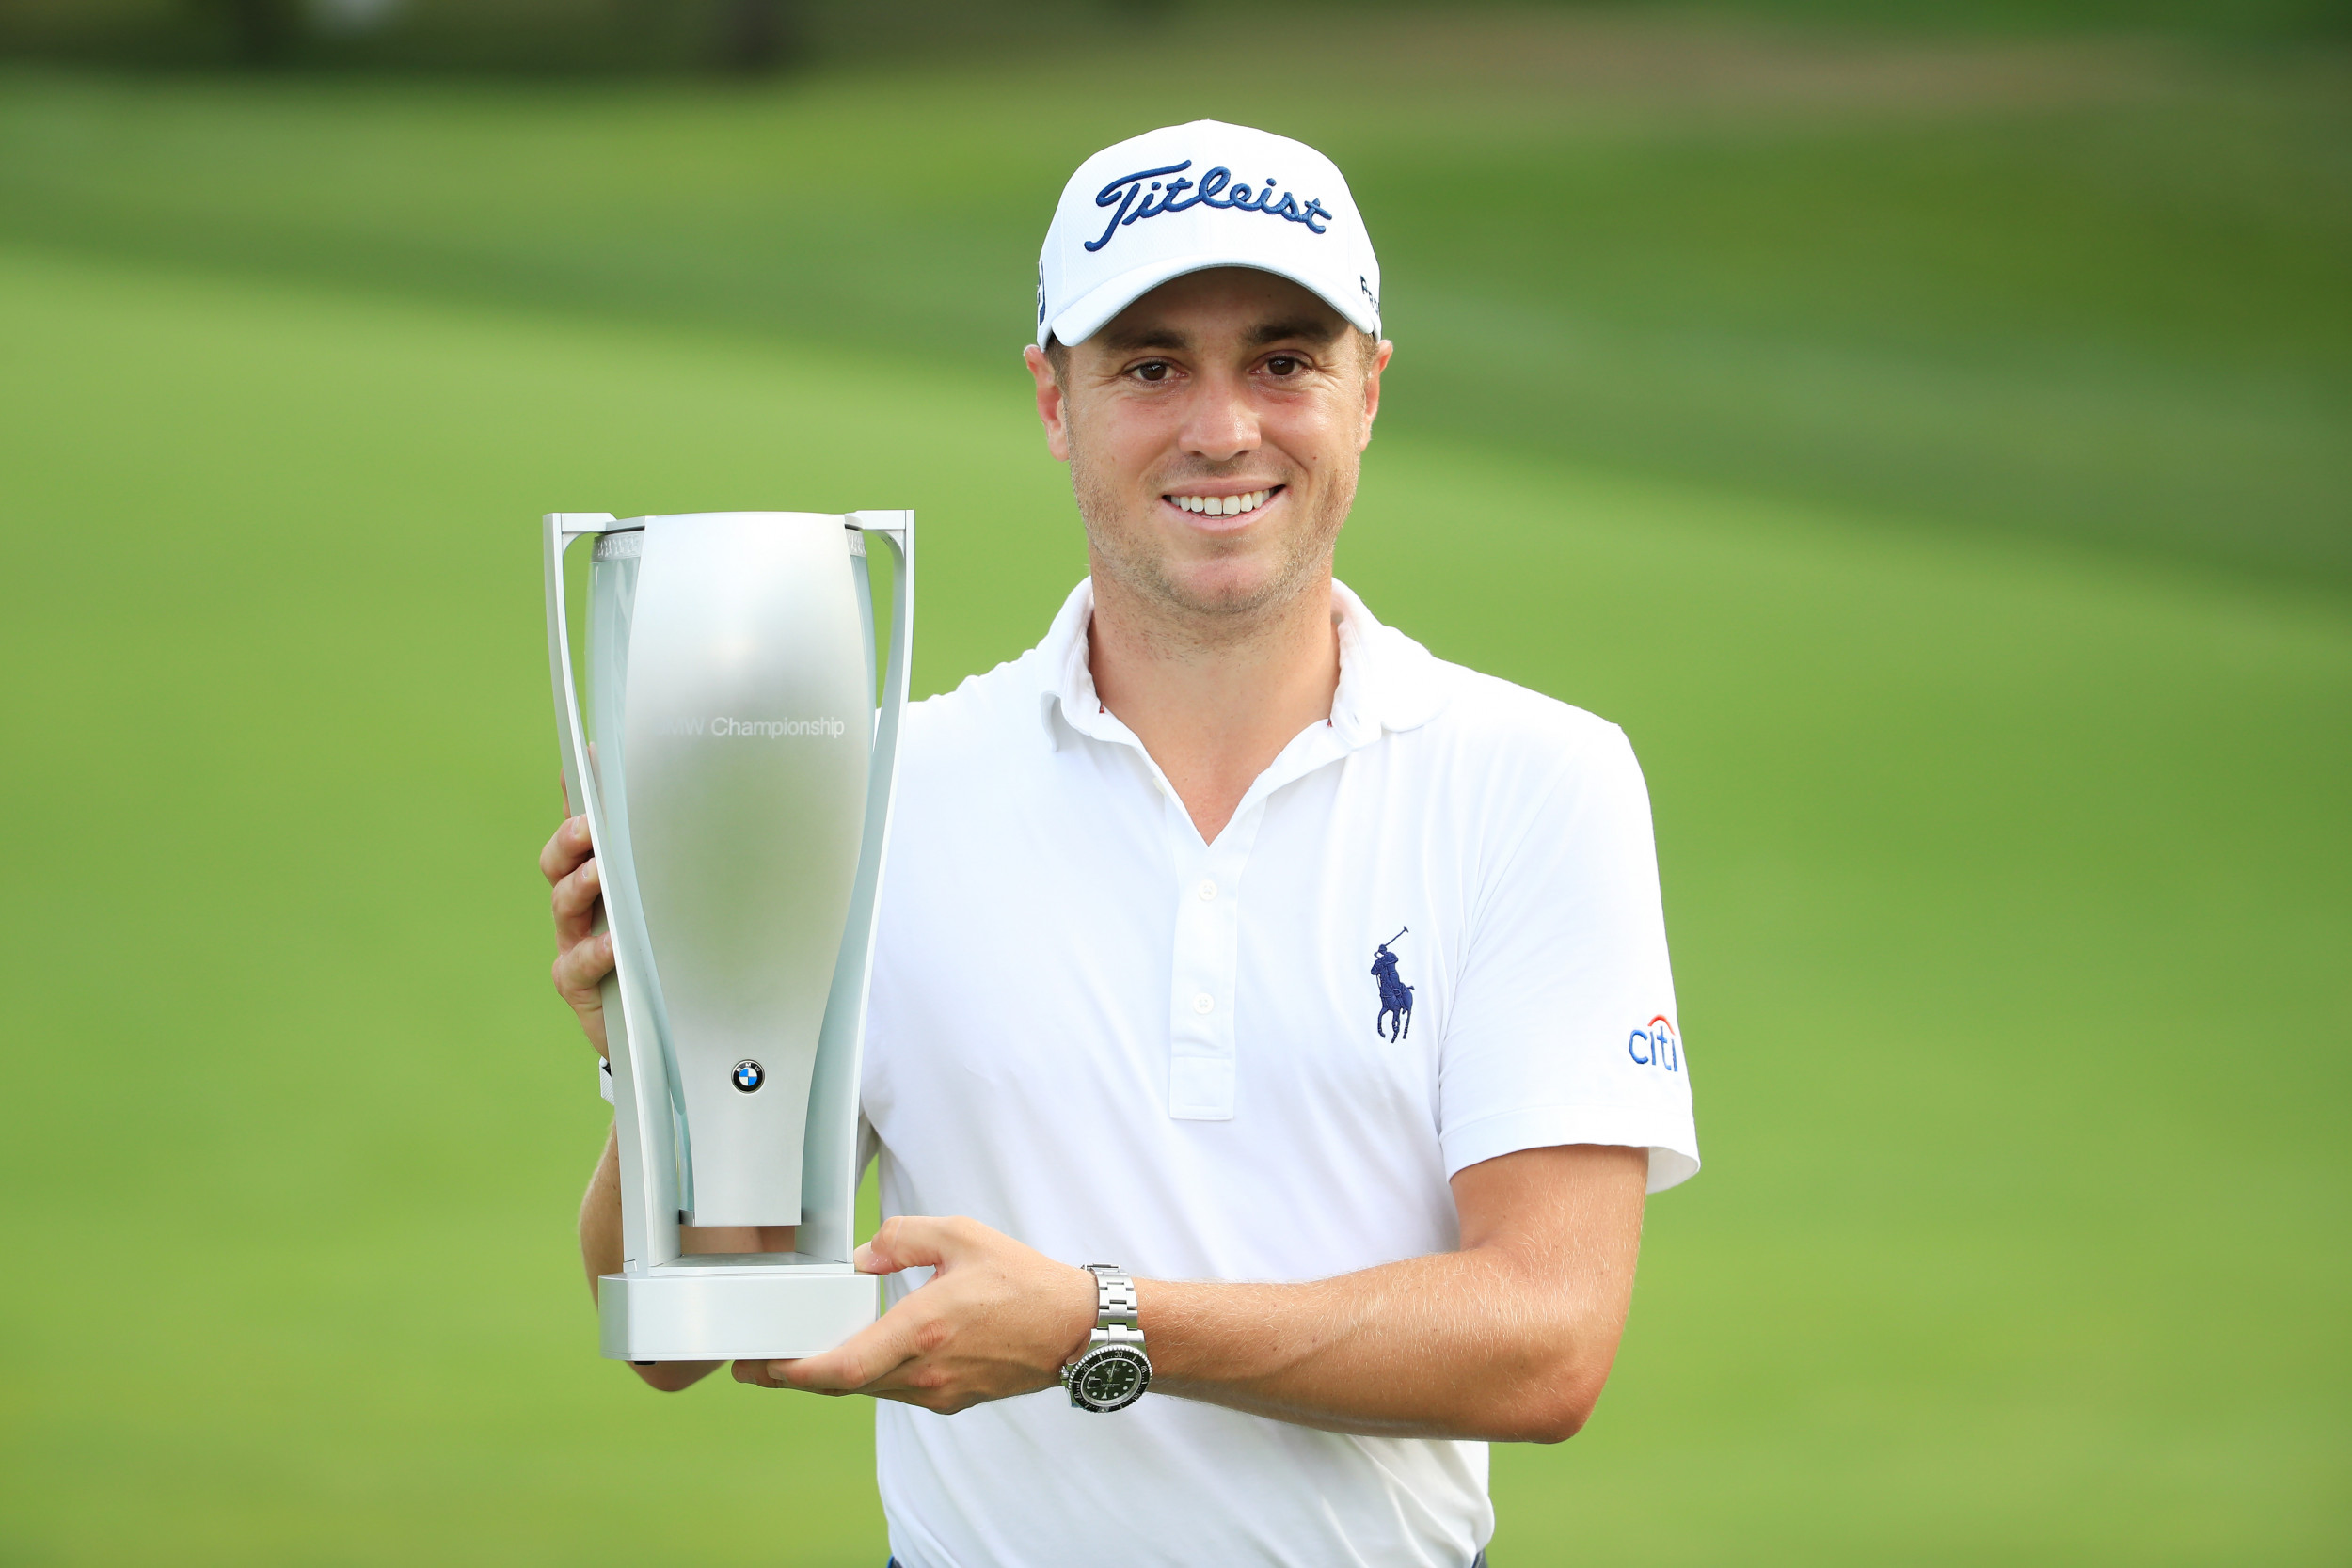 fedex cup watch live